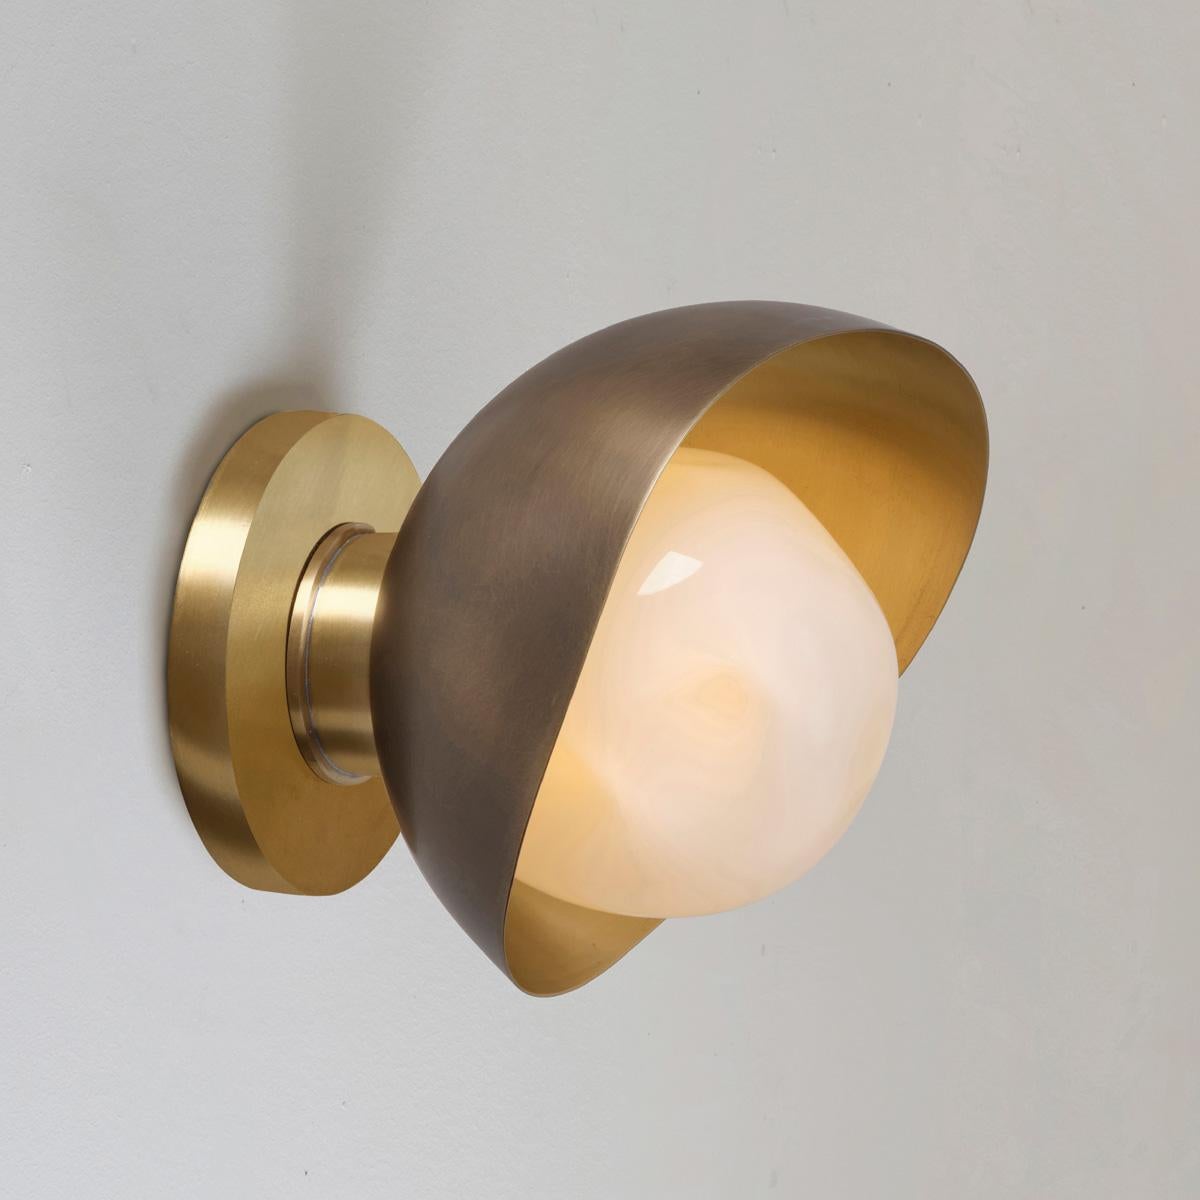 Perla Mini Wall Light by Gaspare Asaro. Black and Polished Brass Finish For Sale 1